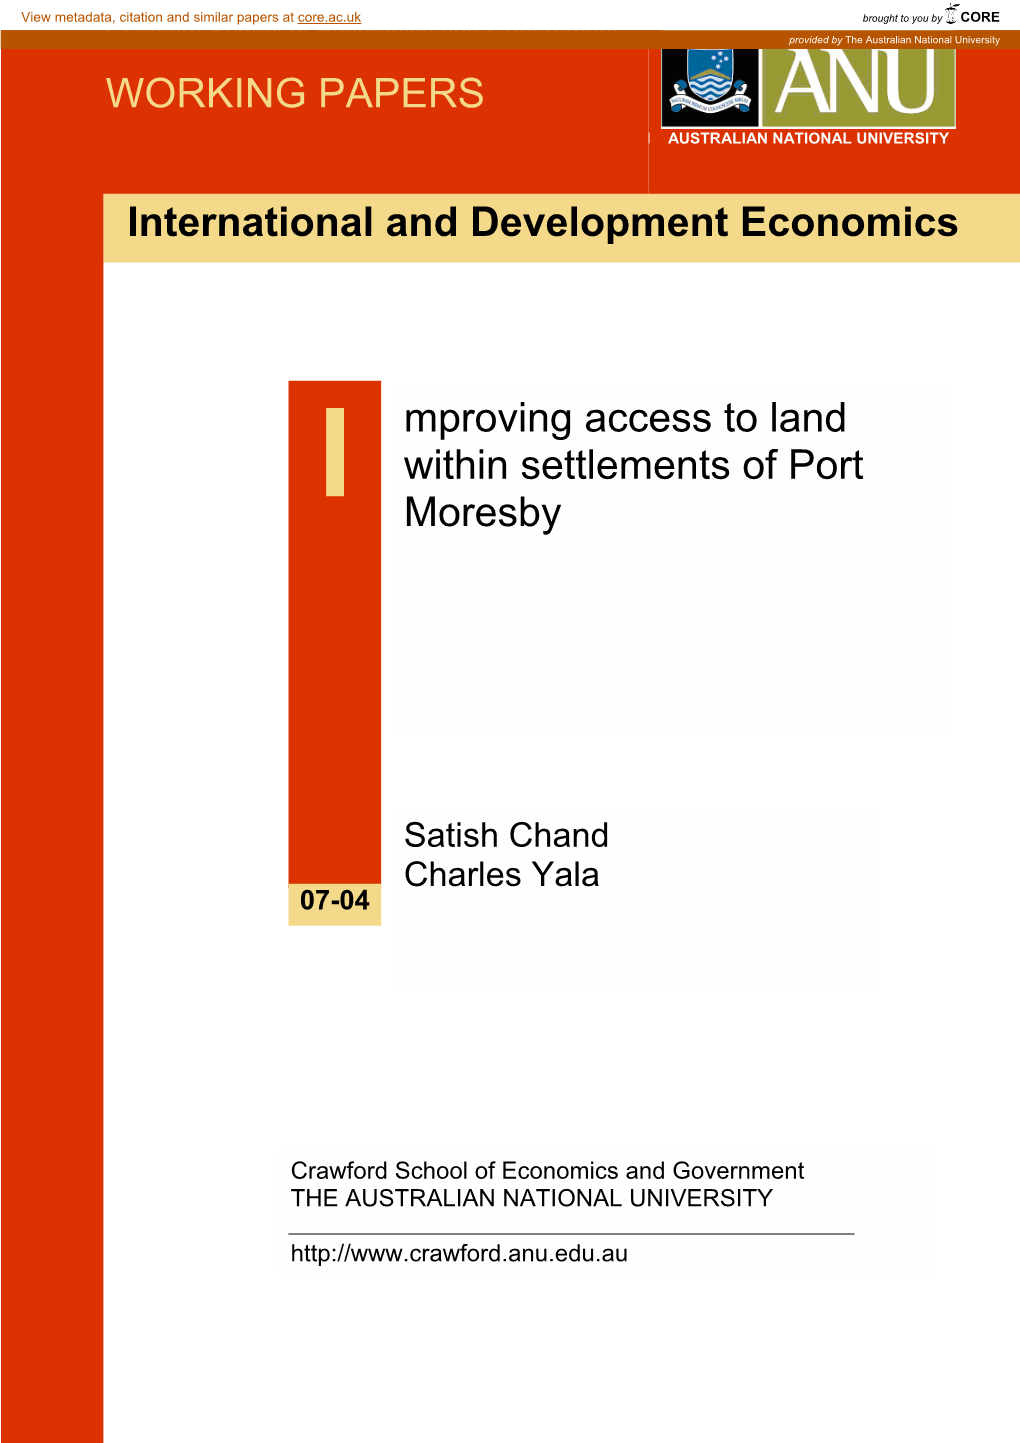 Improving Access to Land Within the Settlements of Port Moresby*